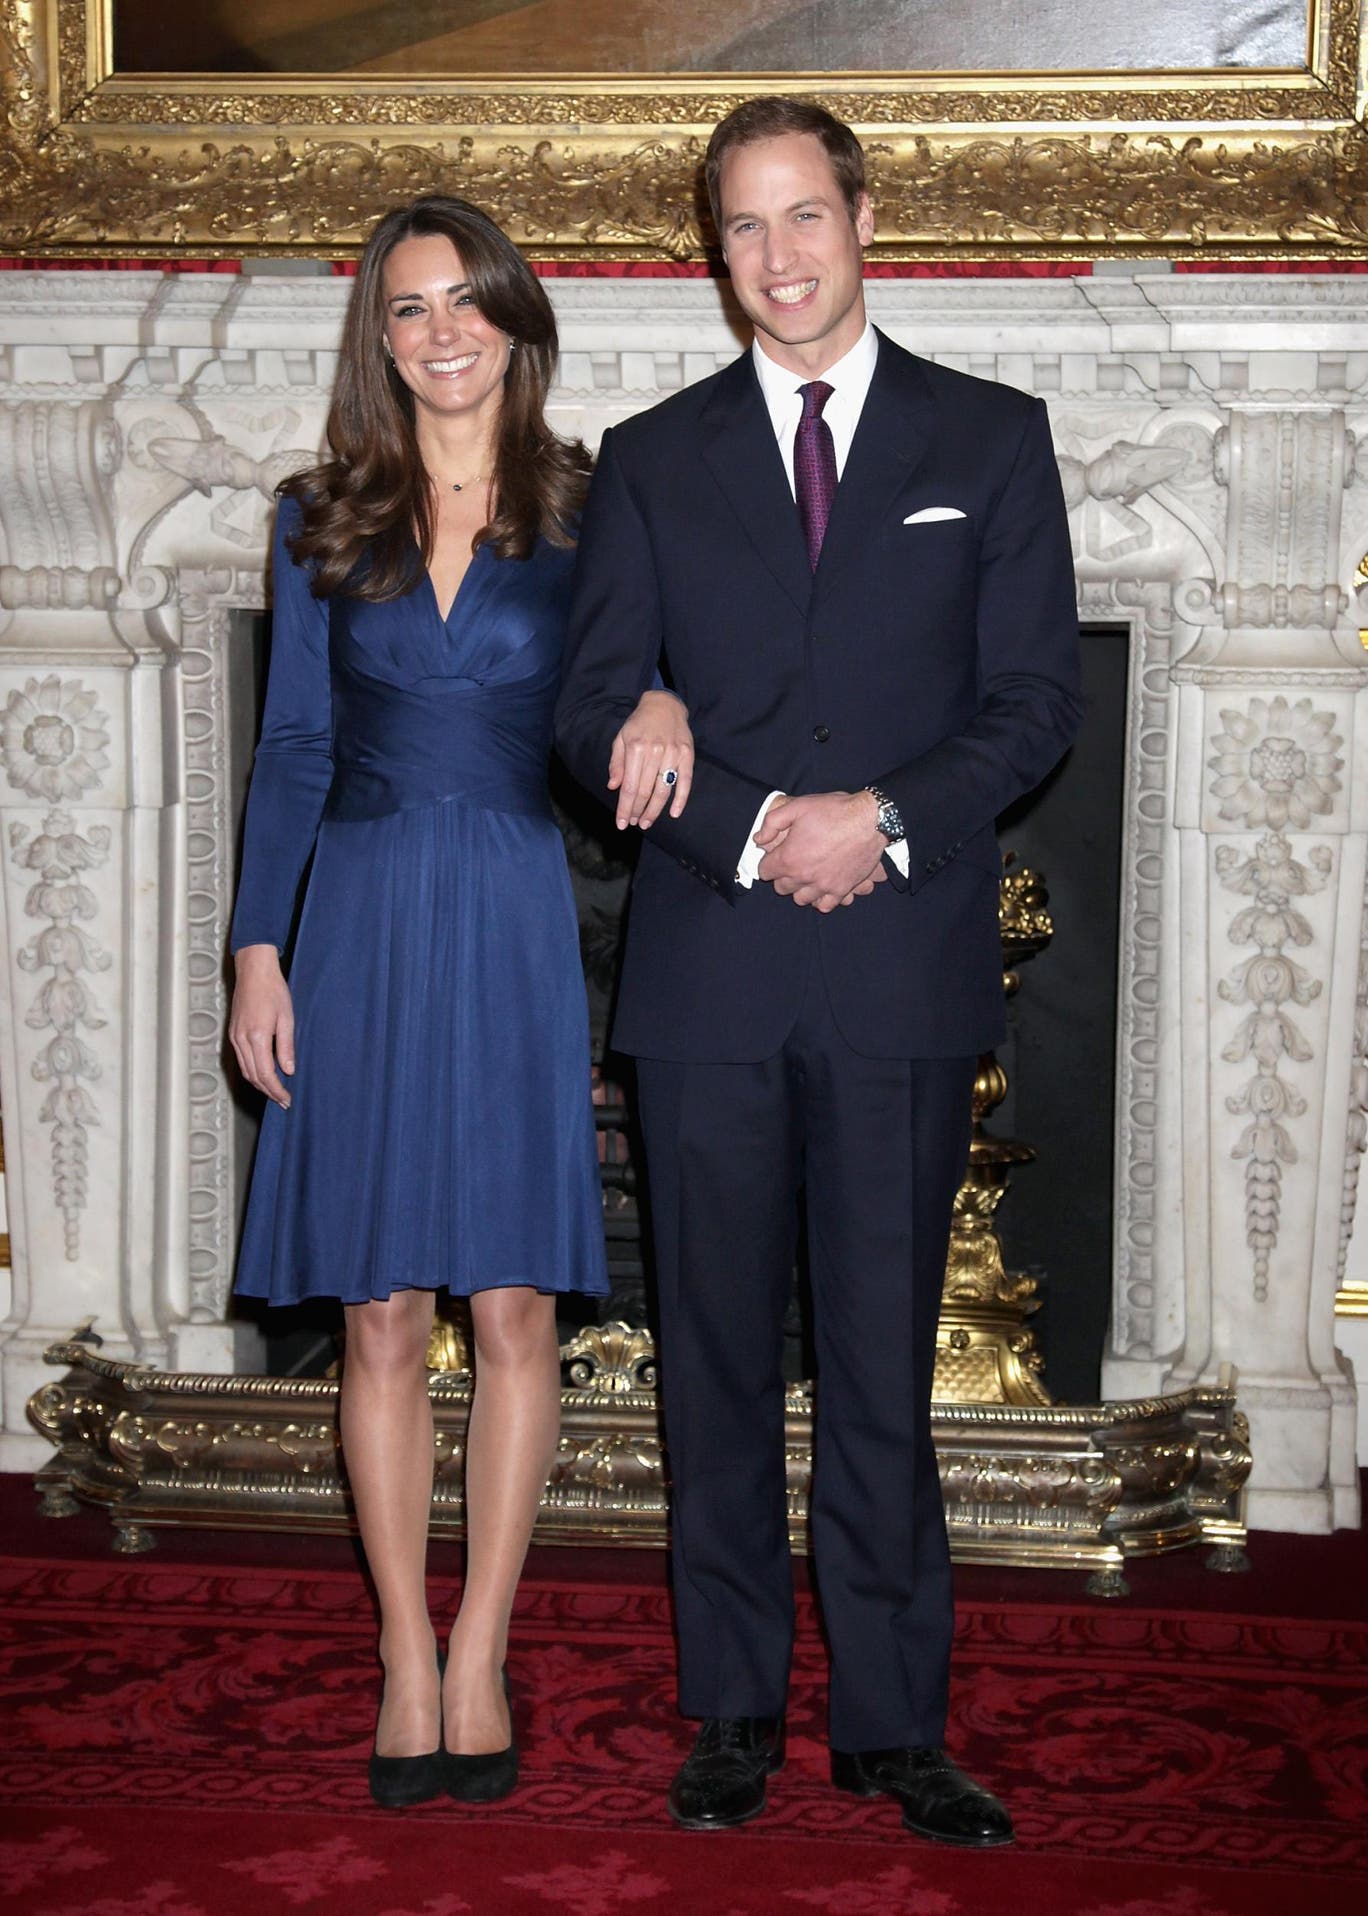 Kate and William at their engagement